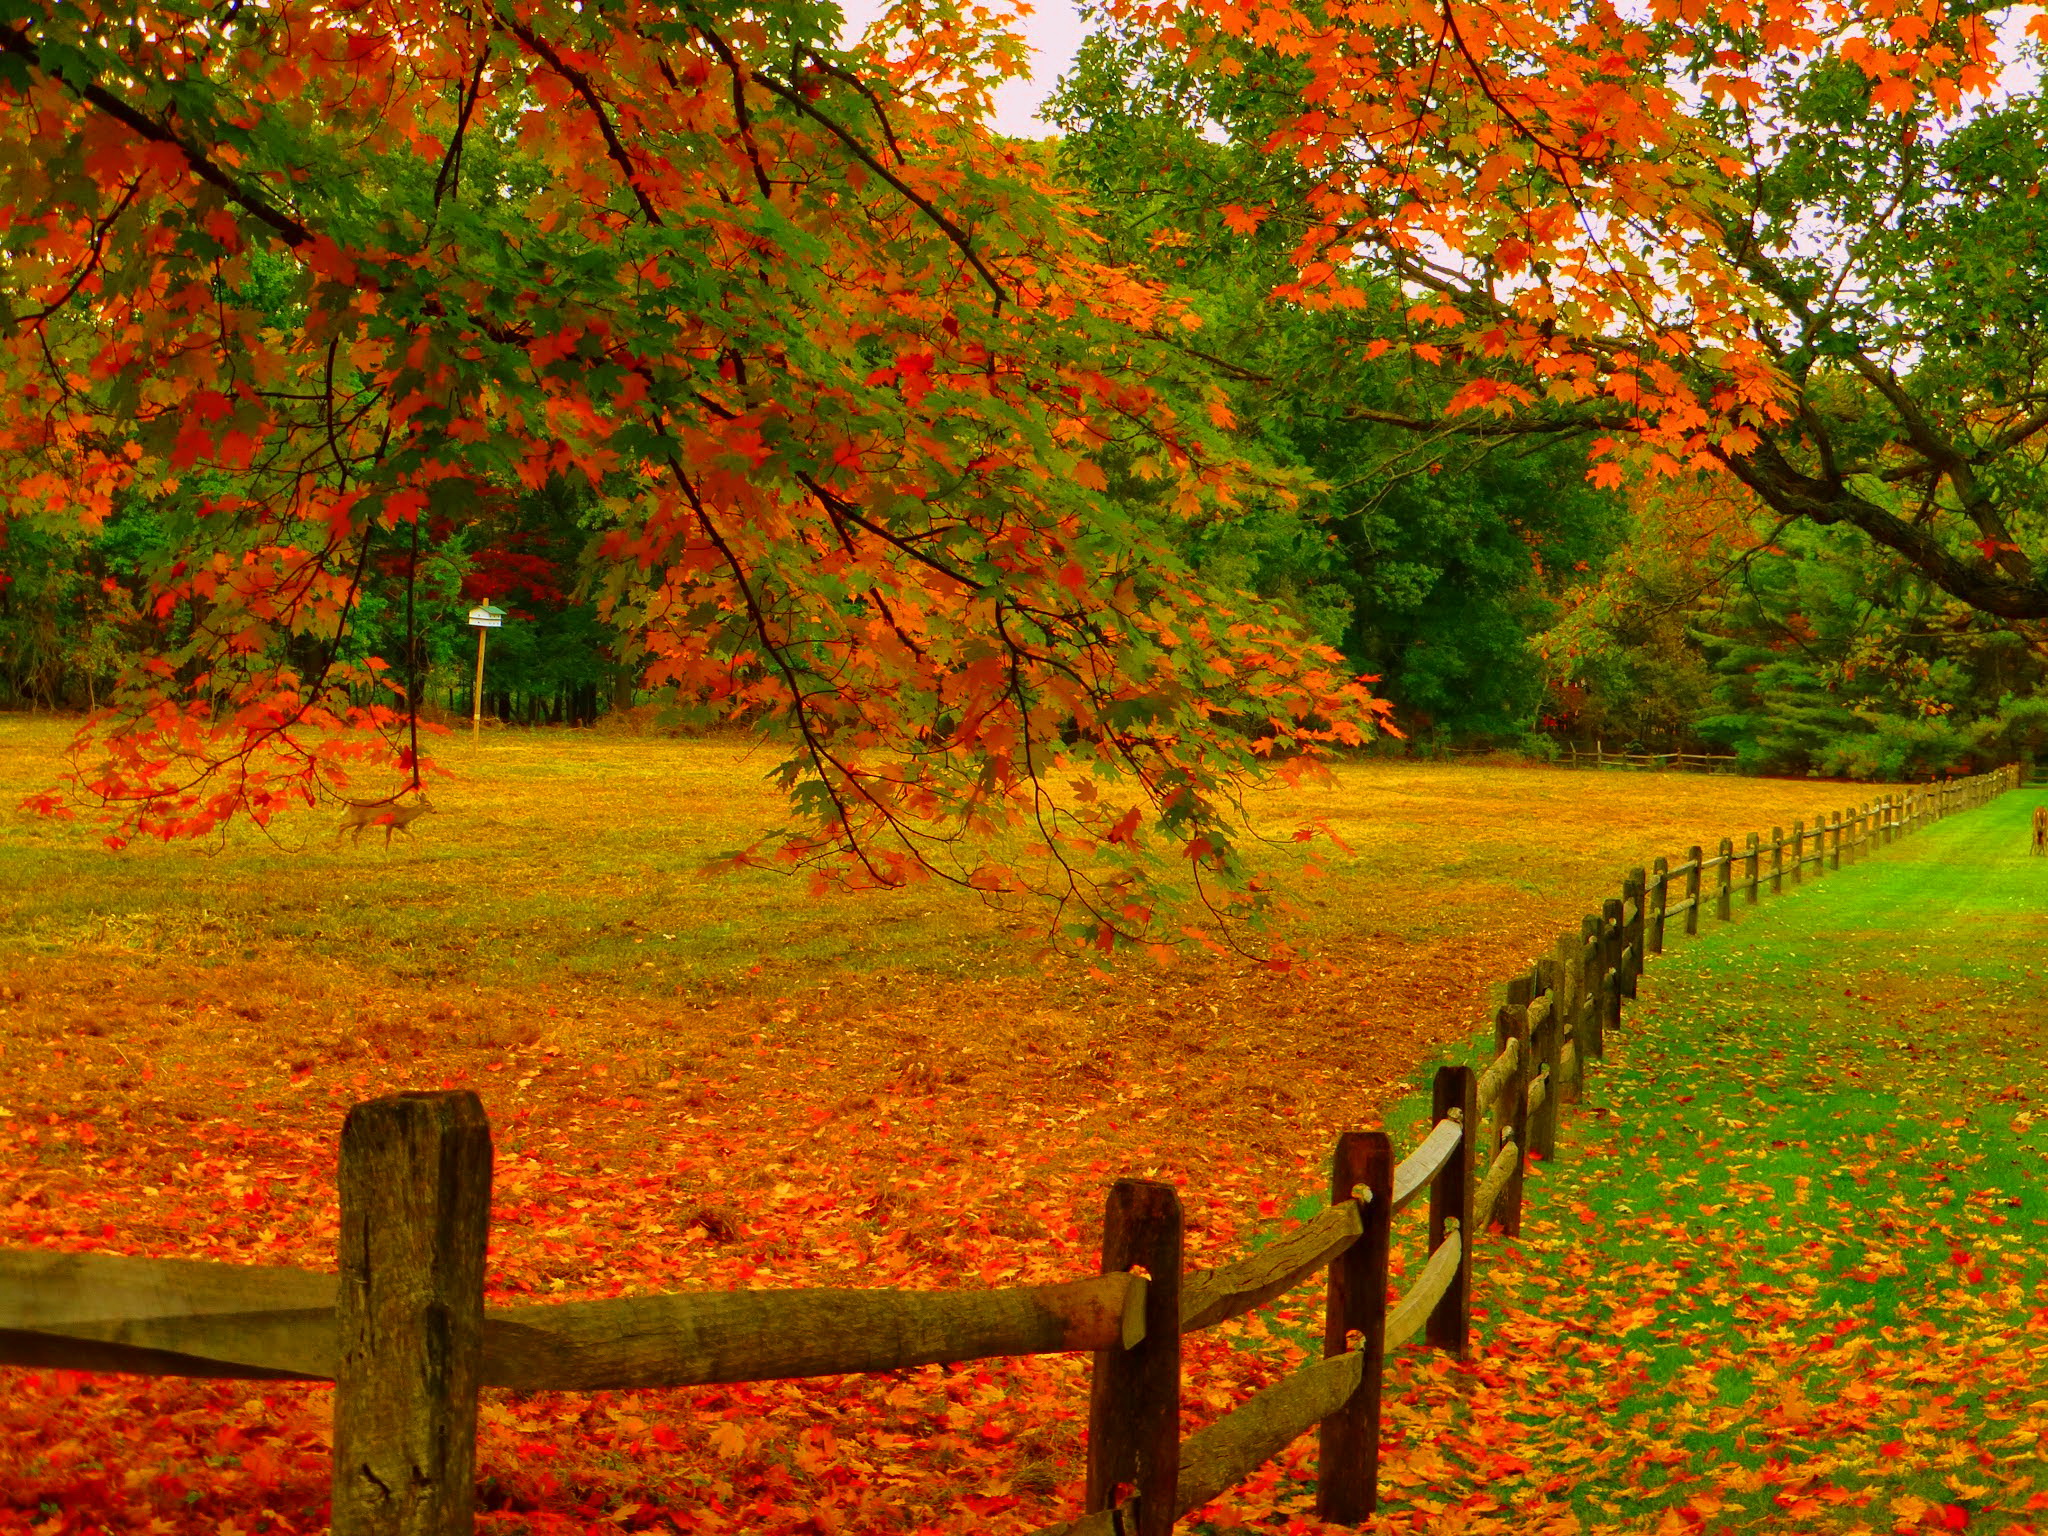 Fence in Autumn Park